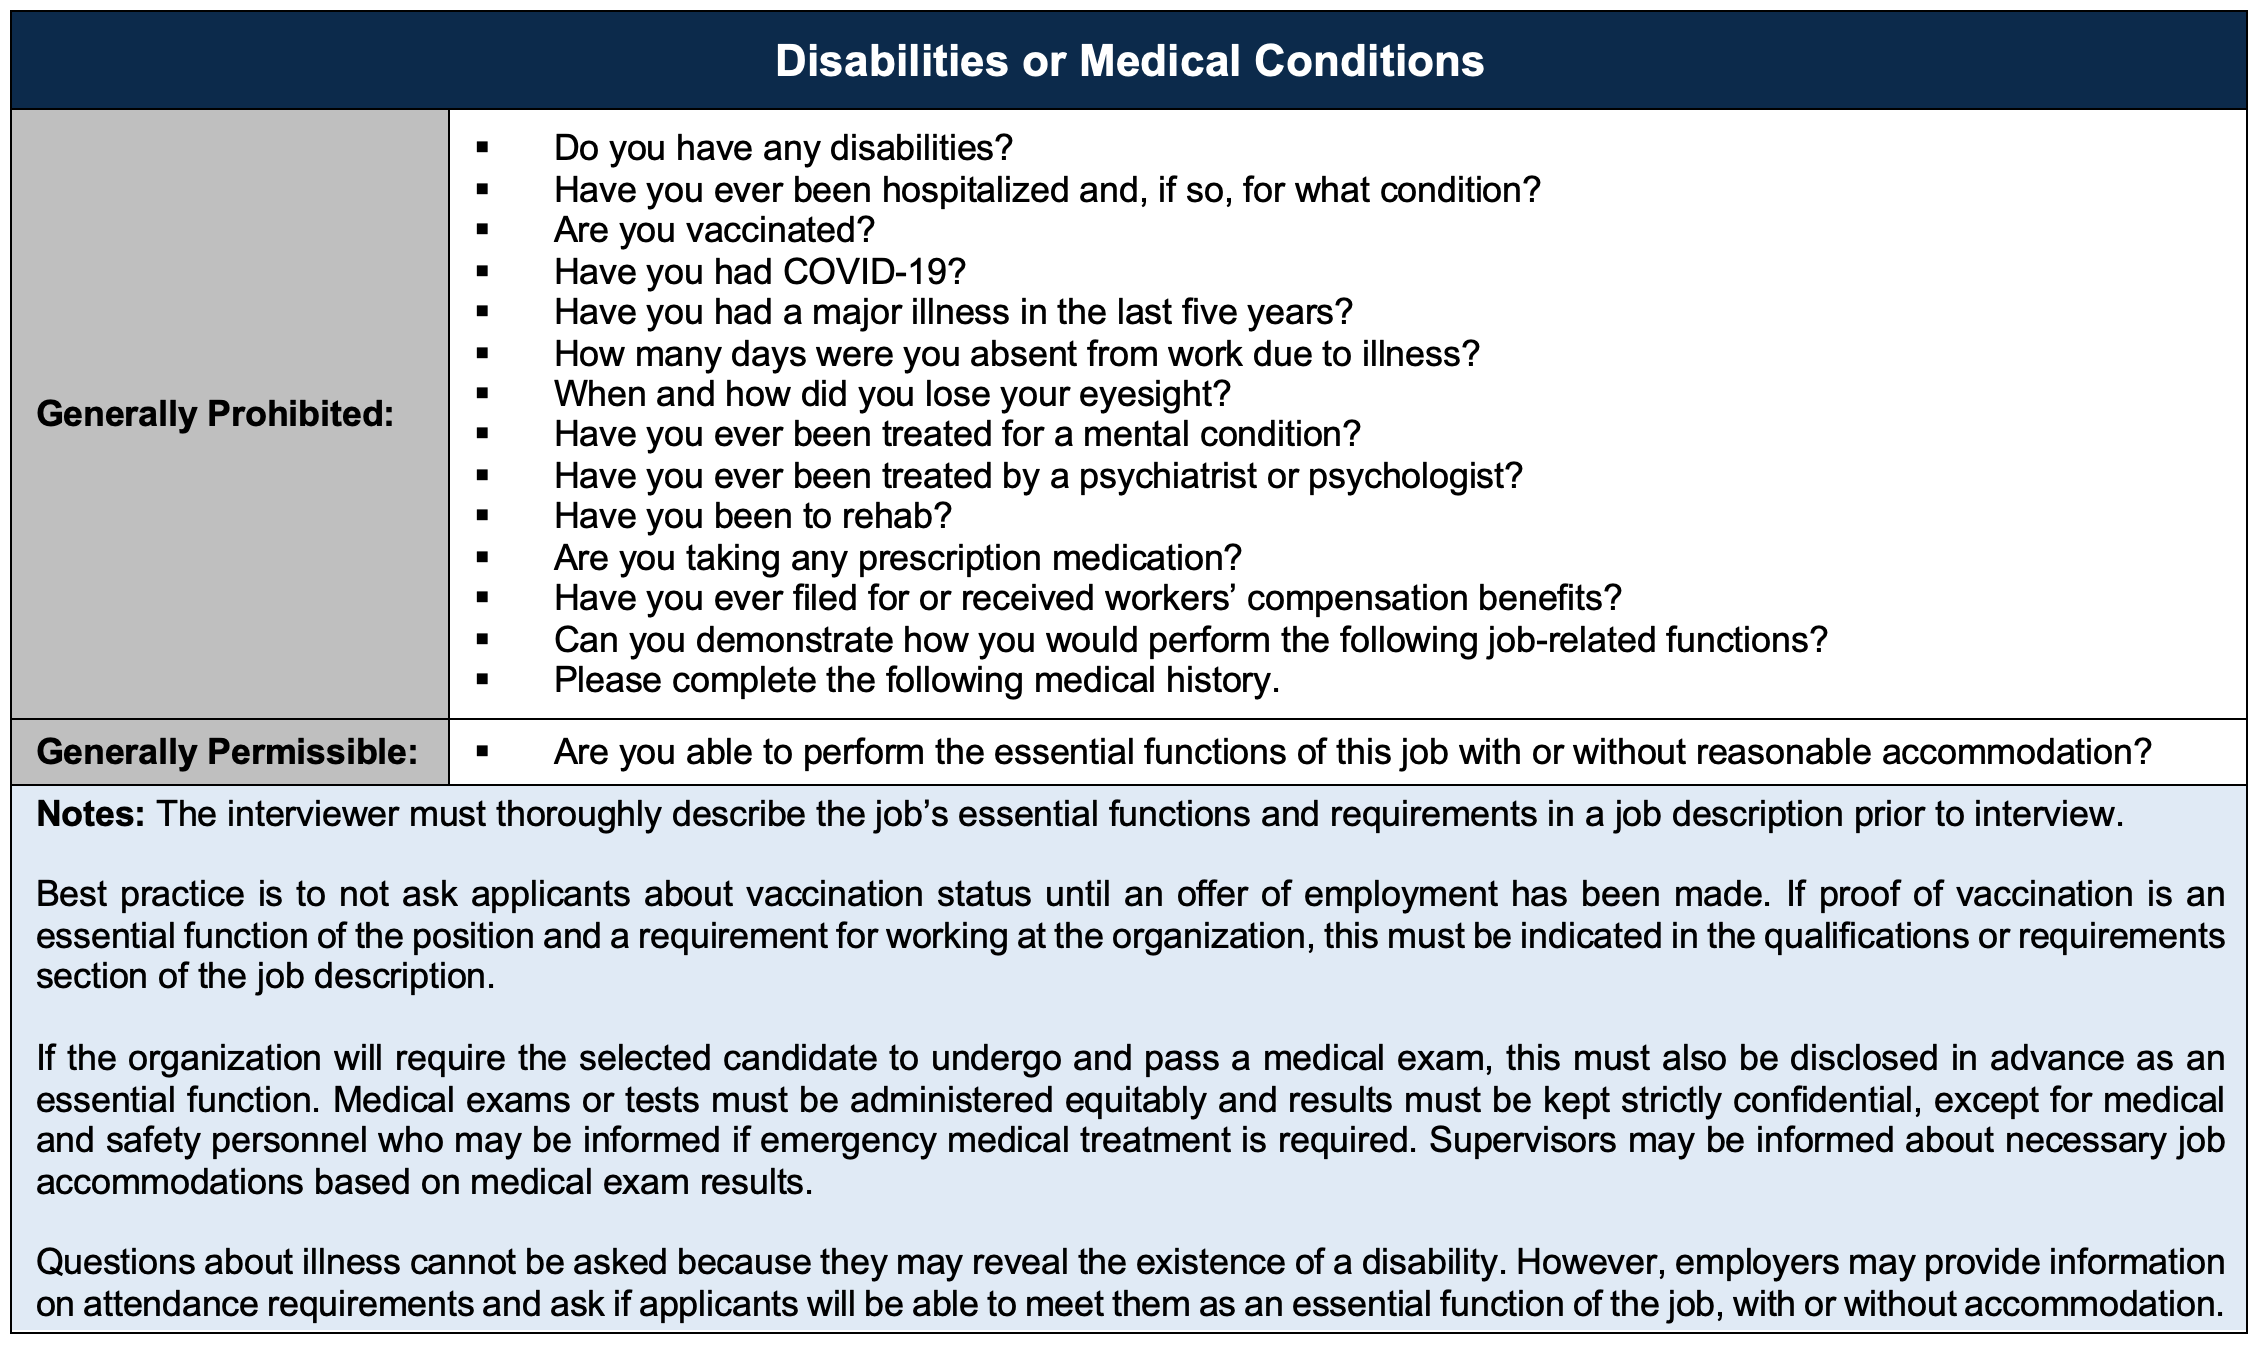 Disabilities or Medical Conditions